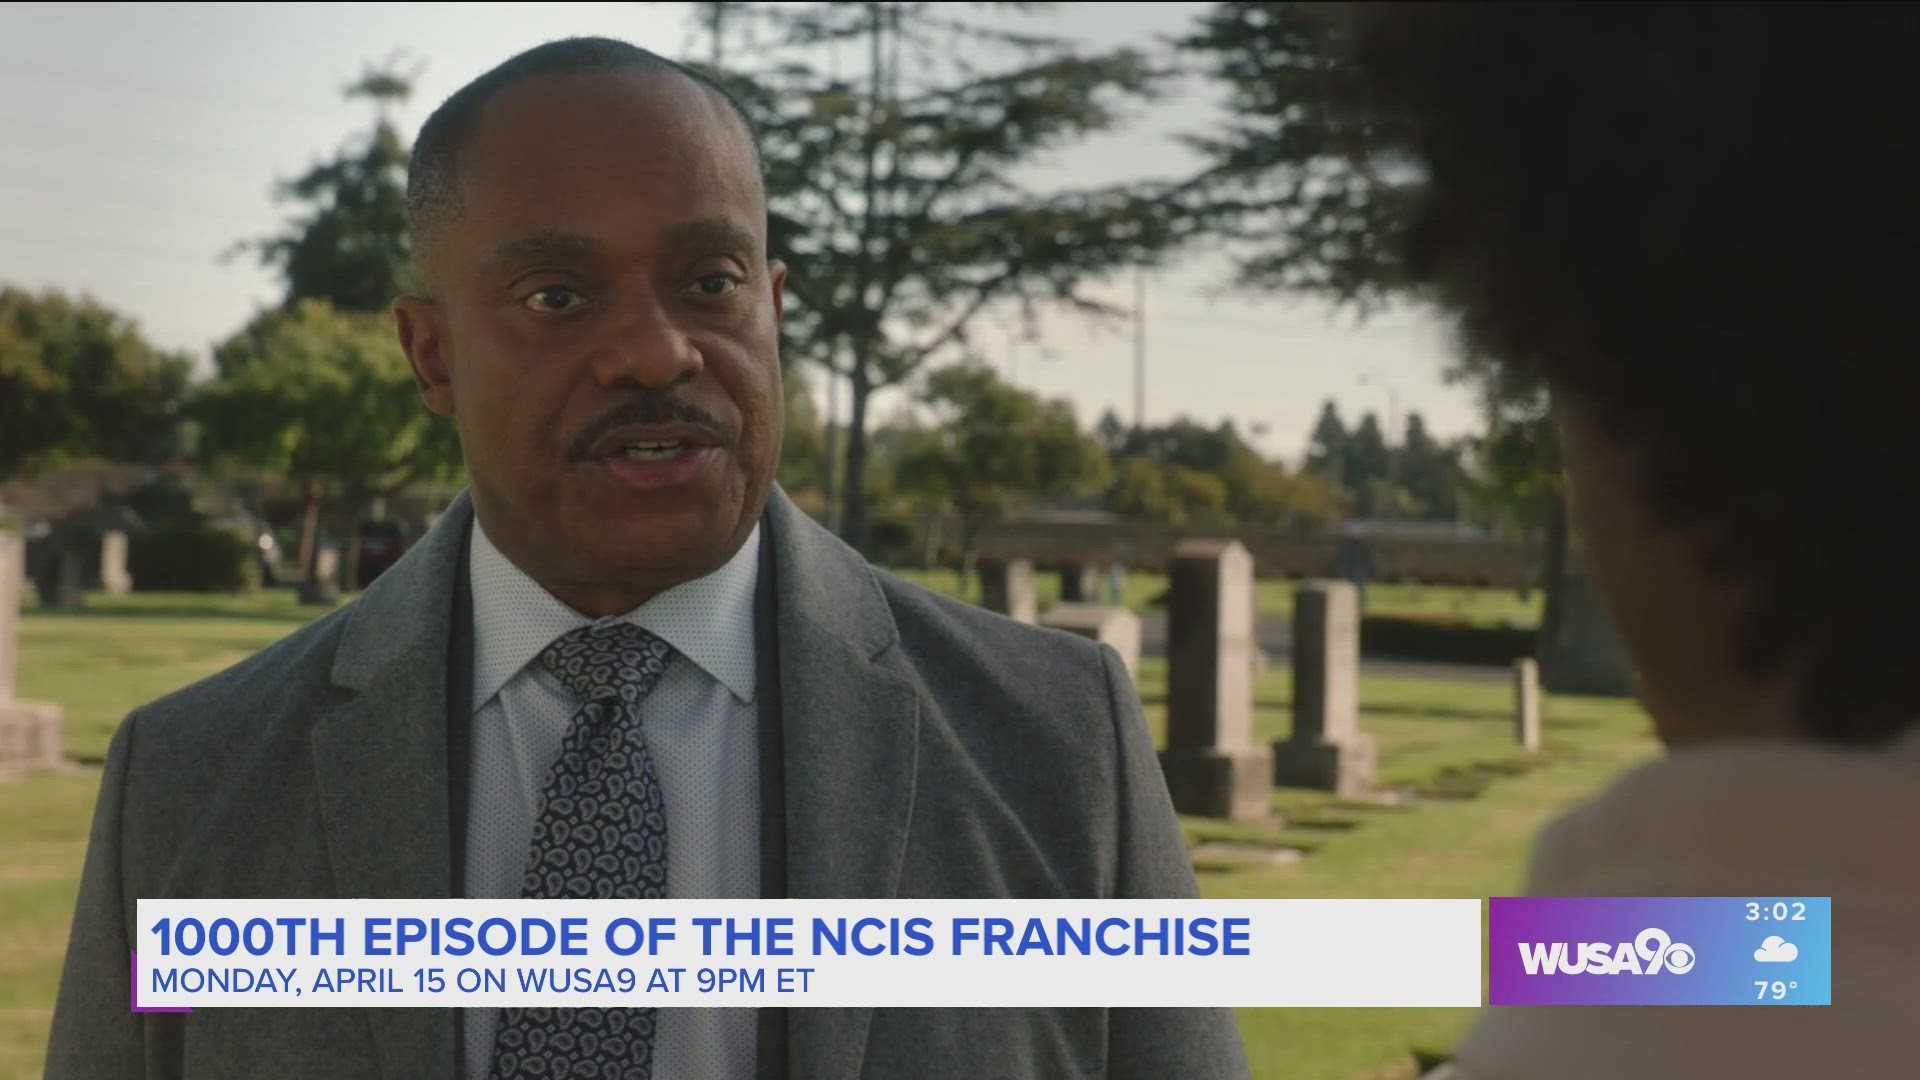 Elaine speaks with Rocky Carroll about the NCIS franchise reaching its 1000th episode milestone! The 1000th episode airs Monday, April 15th at 9 pm on WUSA9.